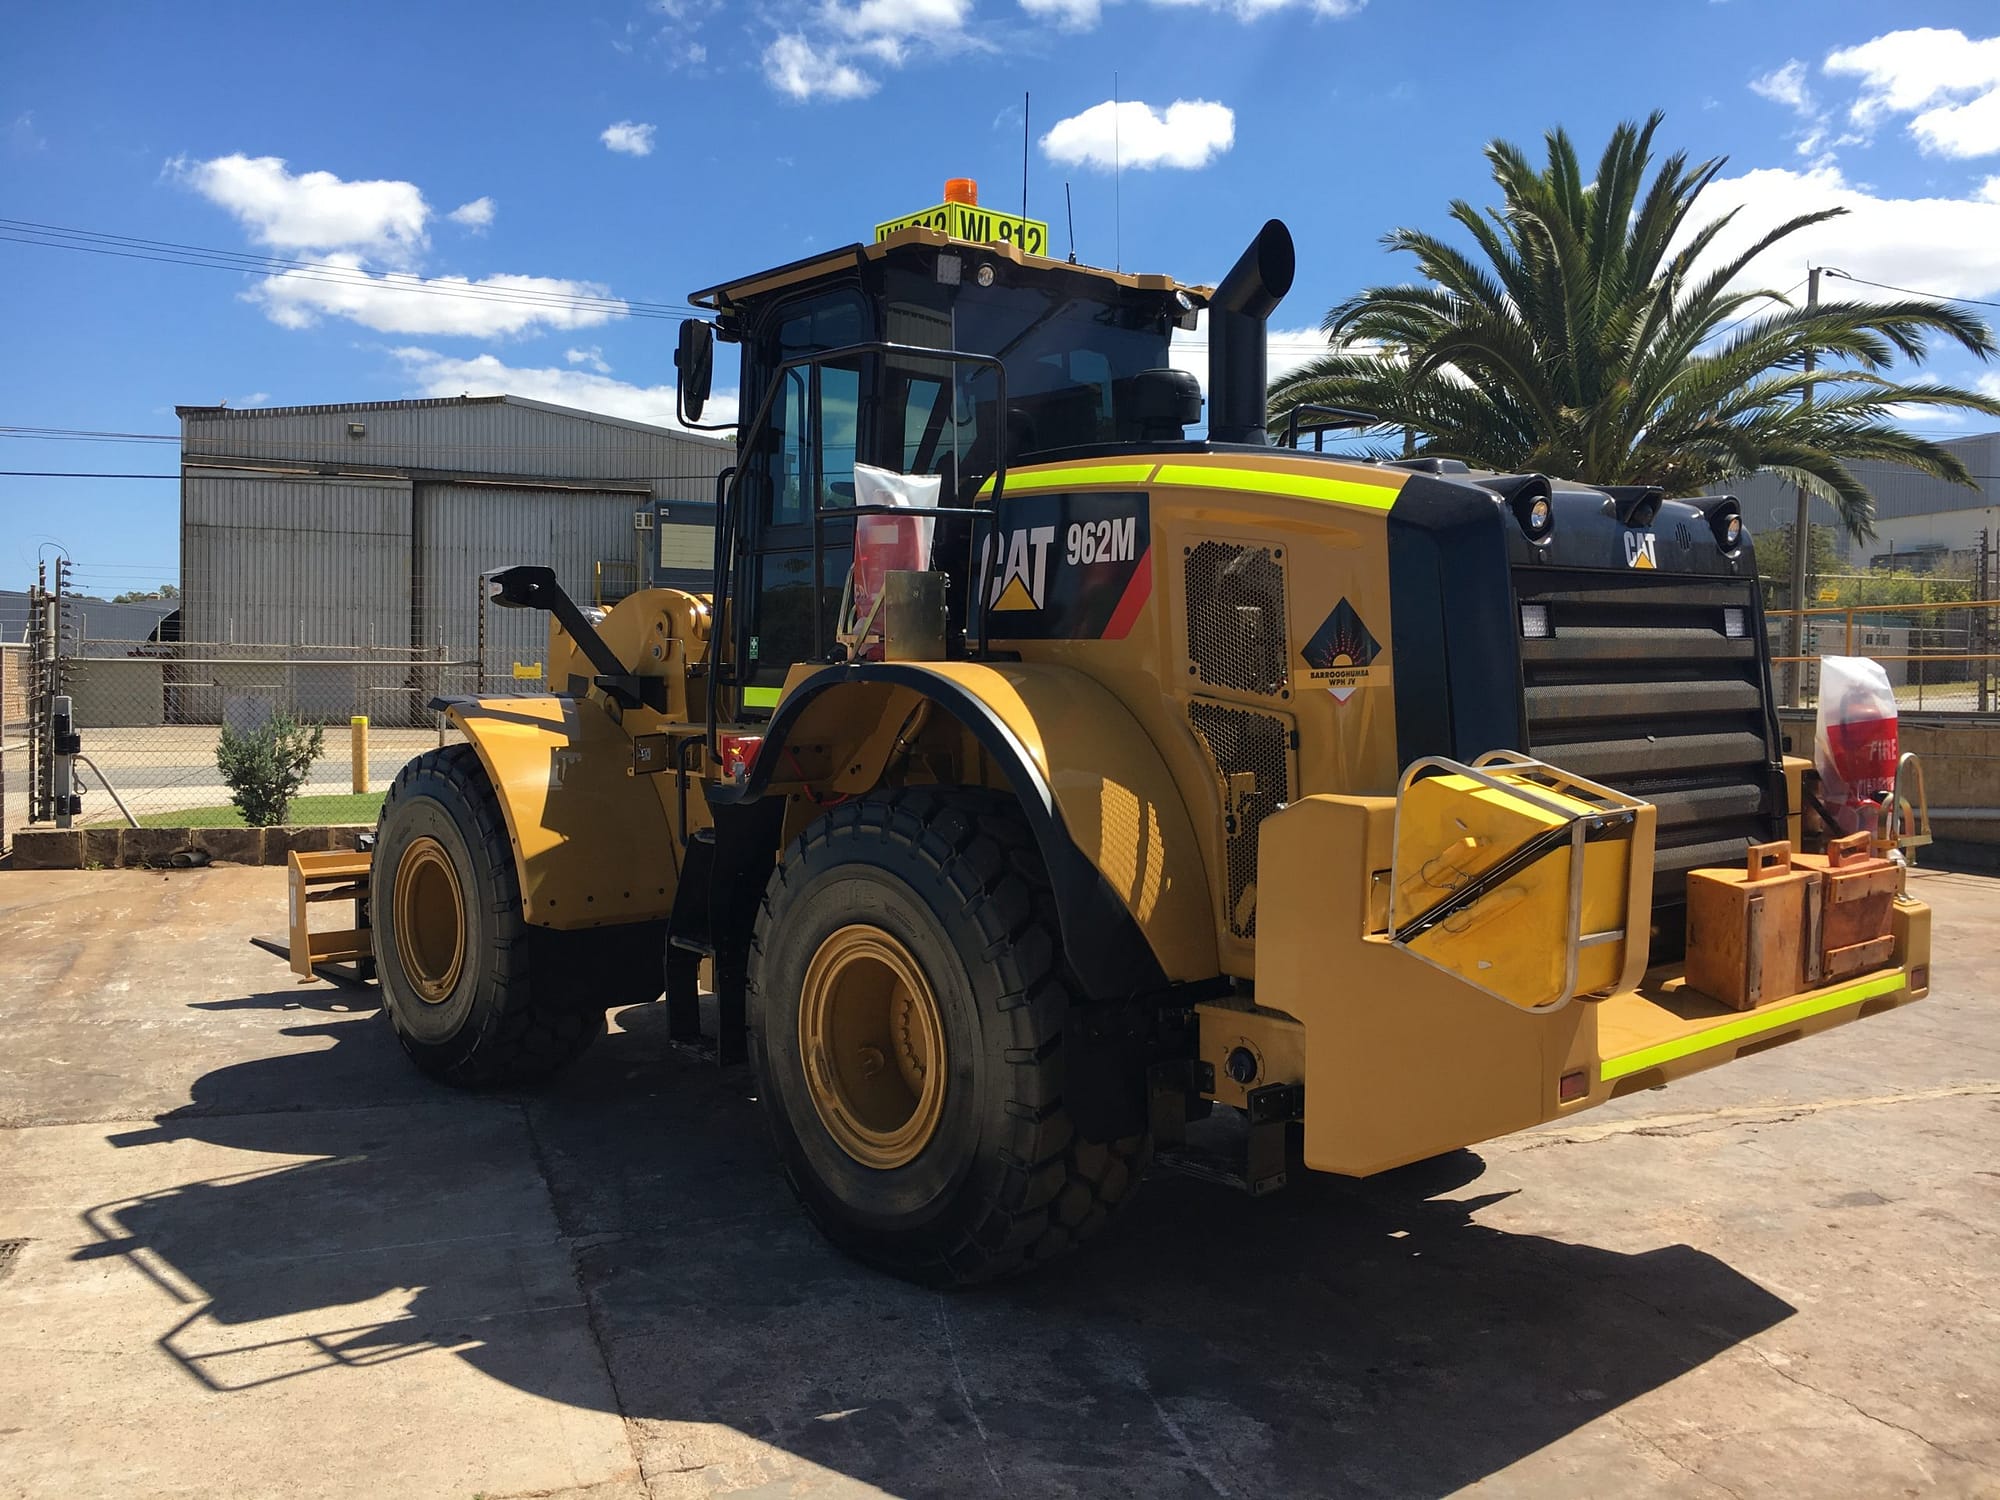 Caterpillar 962M Wheel Loader - For Hire